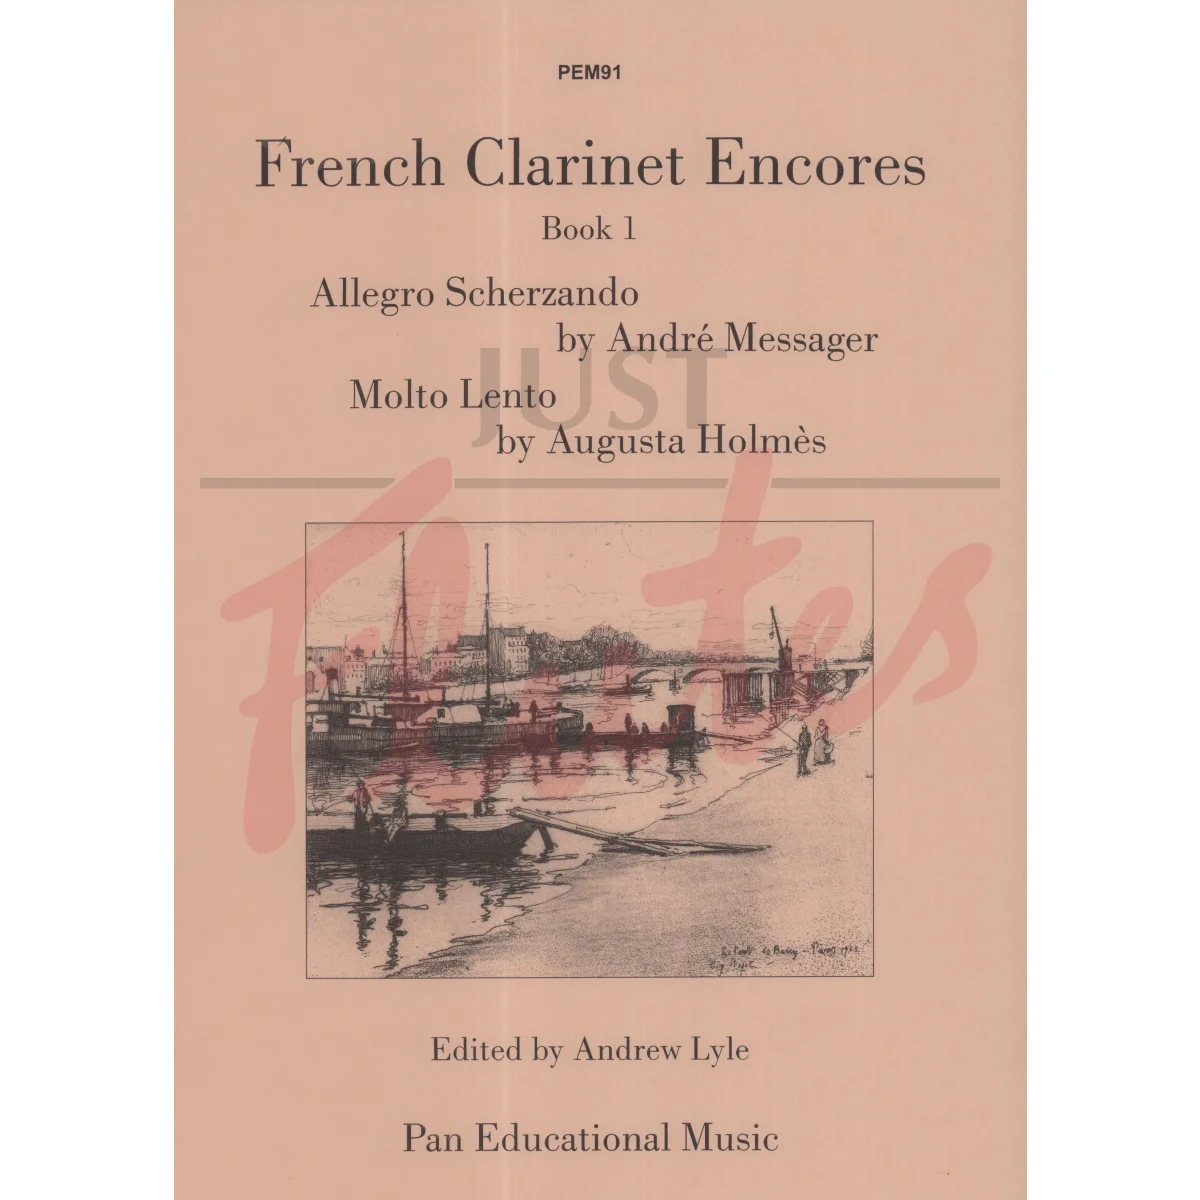 French Clarinet Encores, Book 1